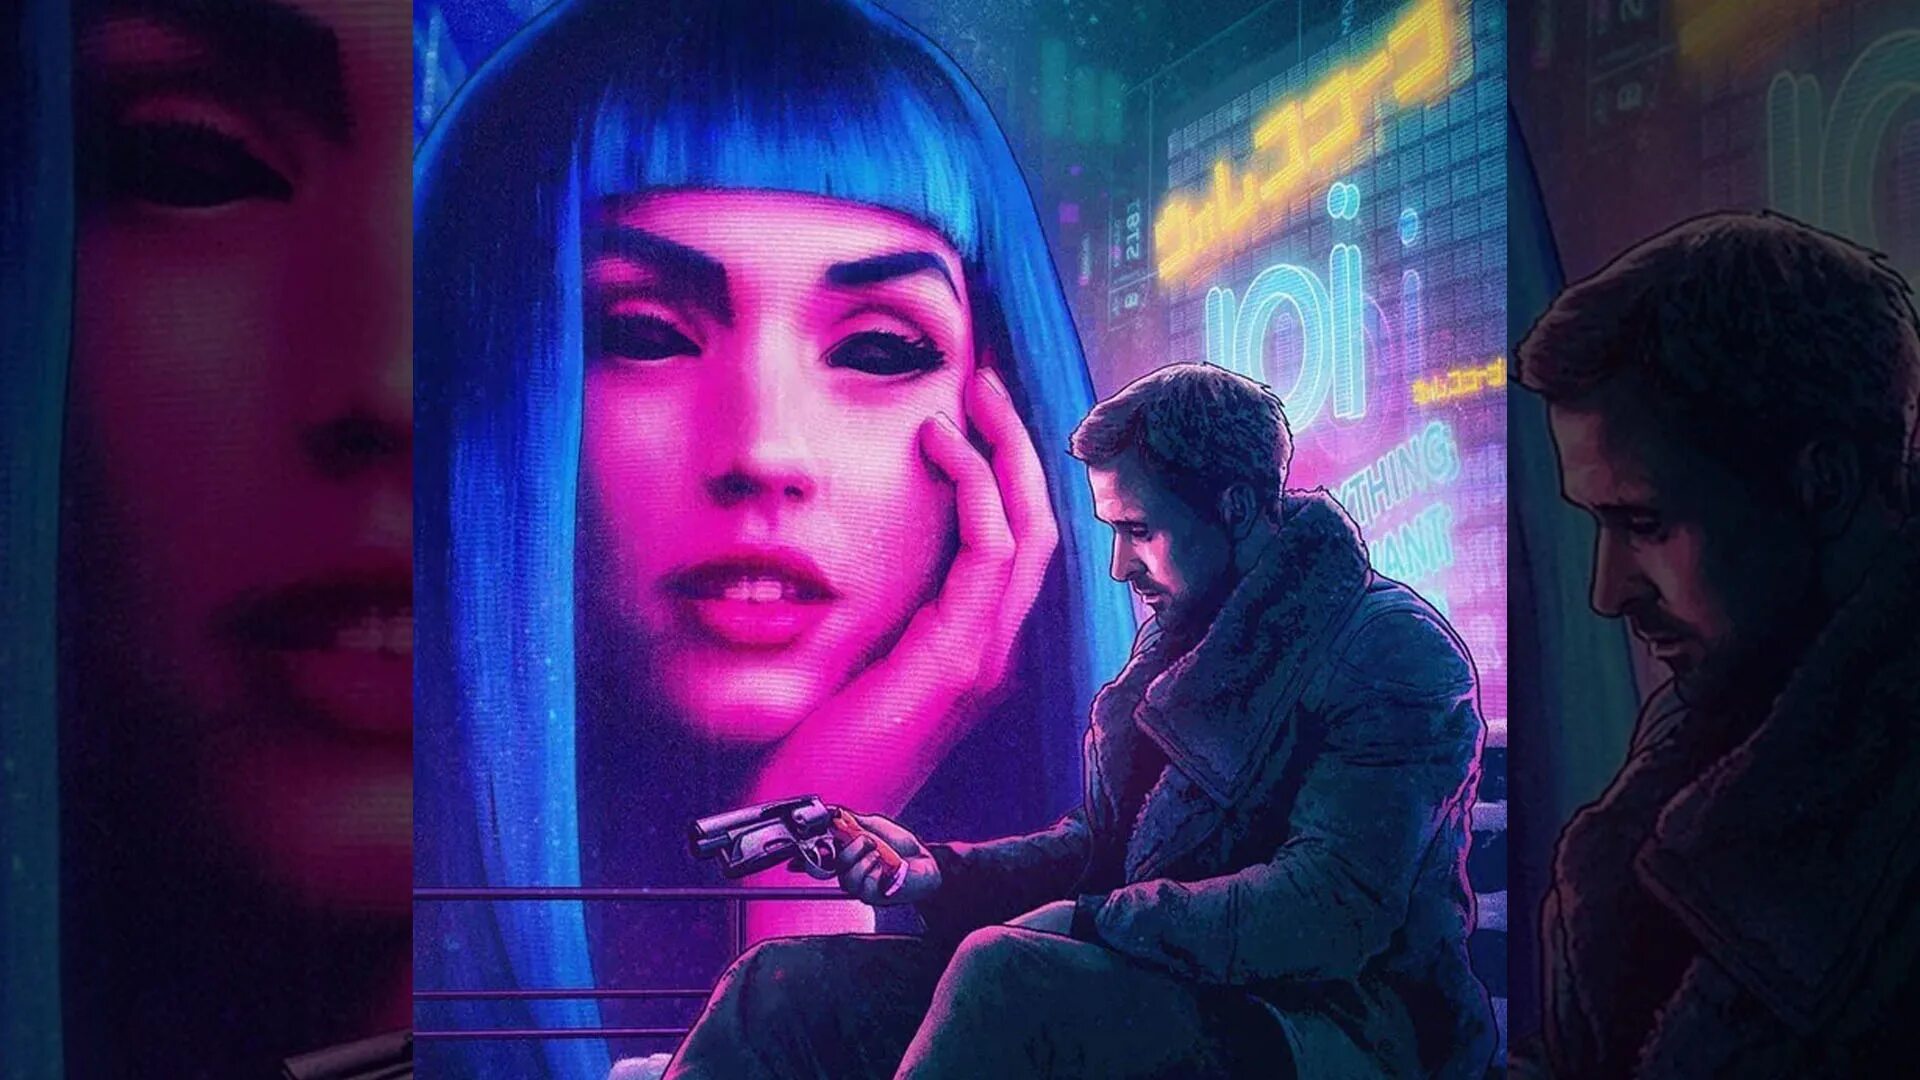 Blade Runner 2049. Blade Runner 2049 you look Lonely. Blade Runner 2049 Synthwave Goose. Look Lonely Blade Runner обои. Can you fix my